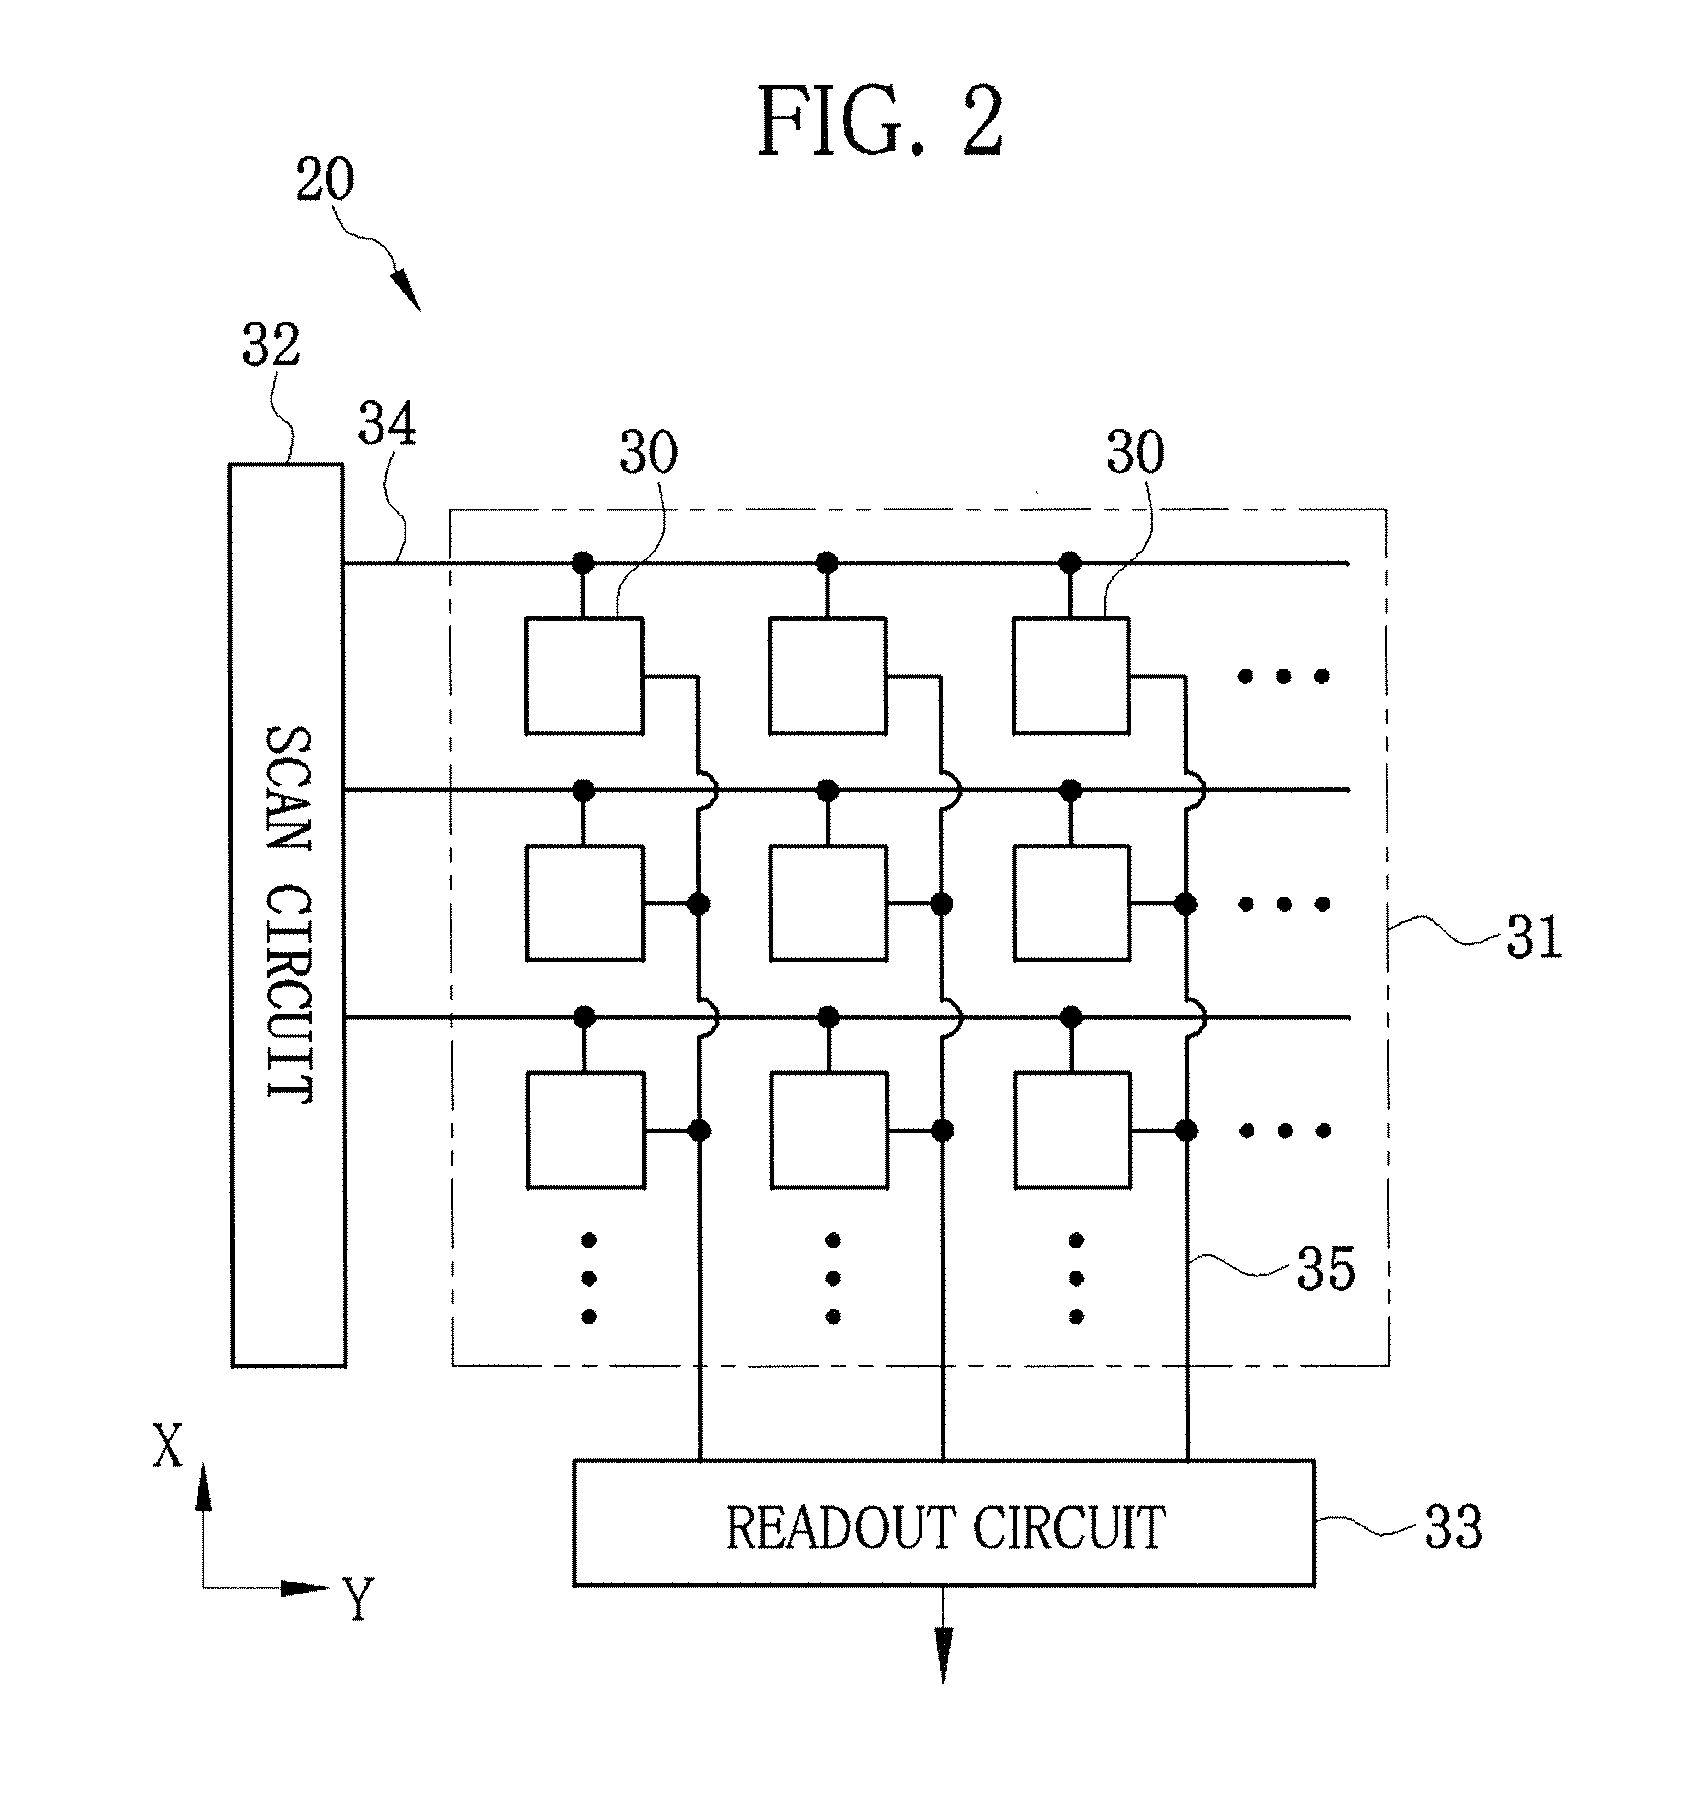 Radiation imaging system and method for detecting positional deviation